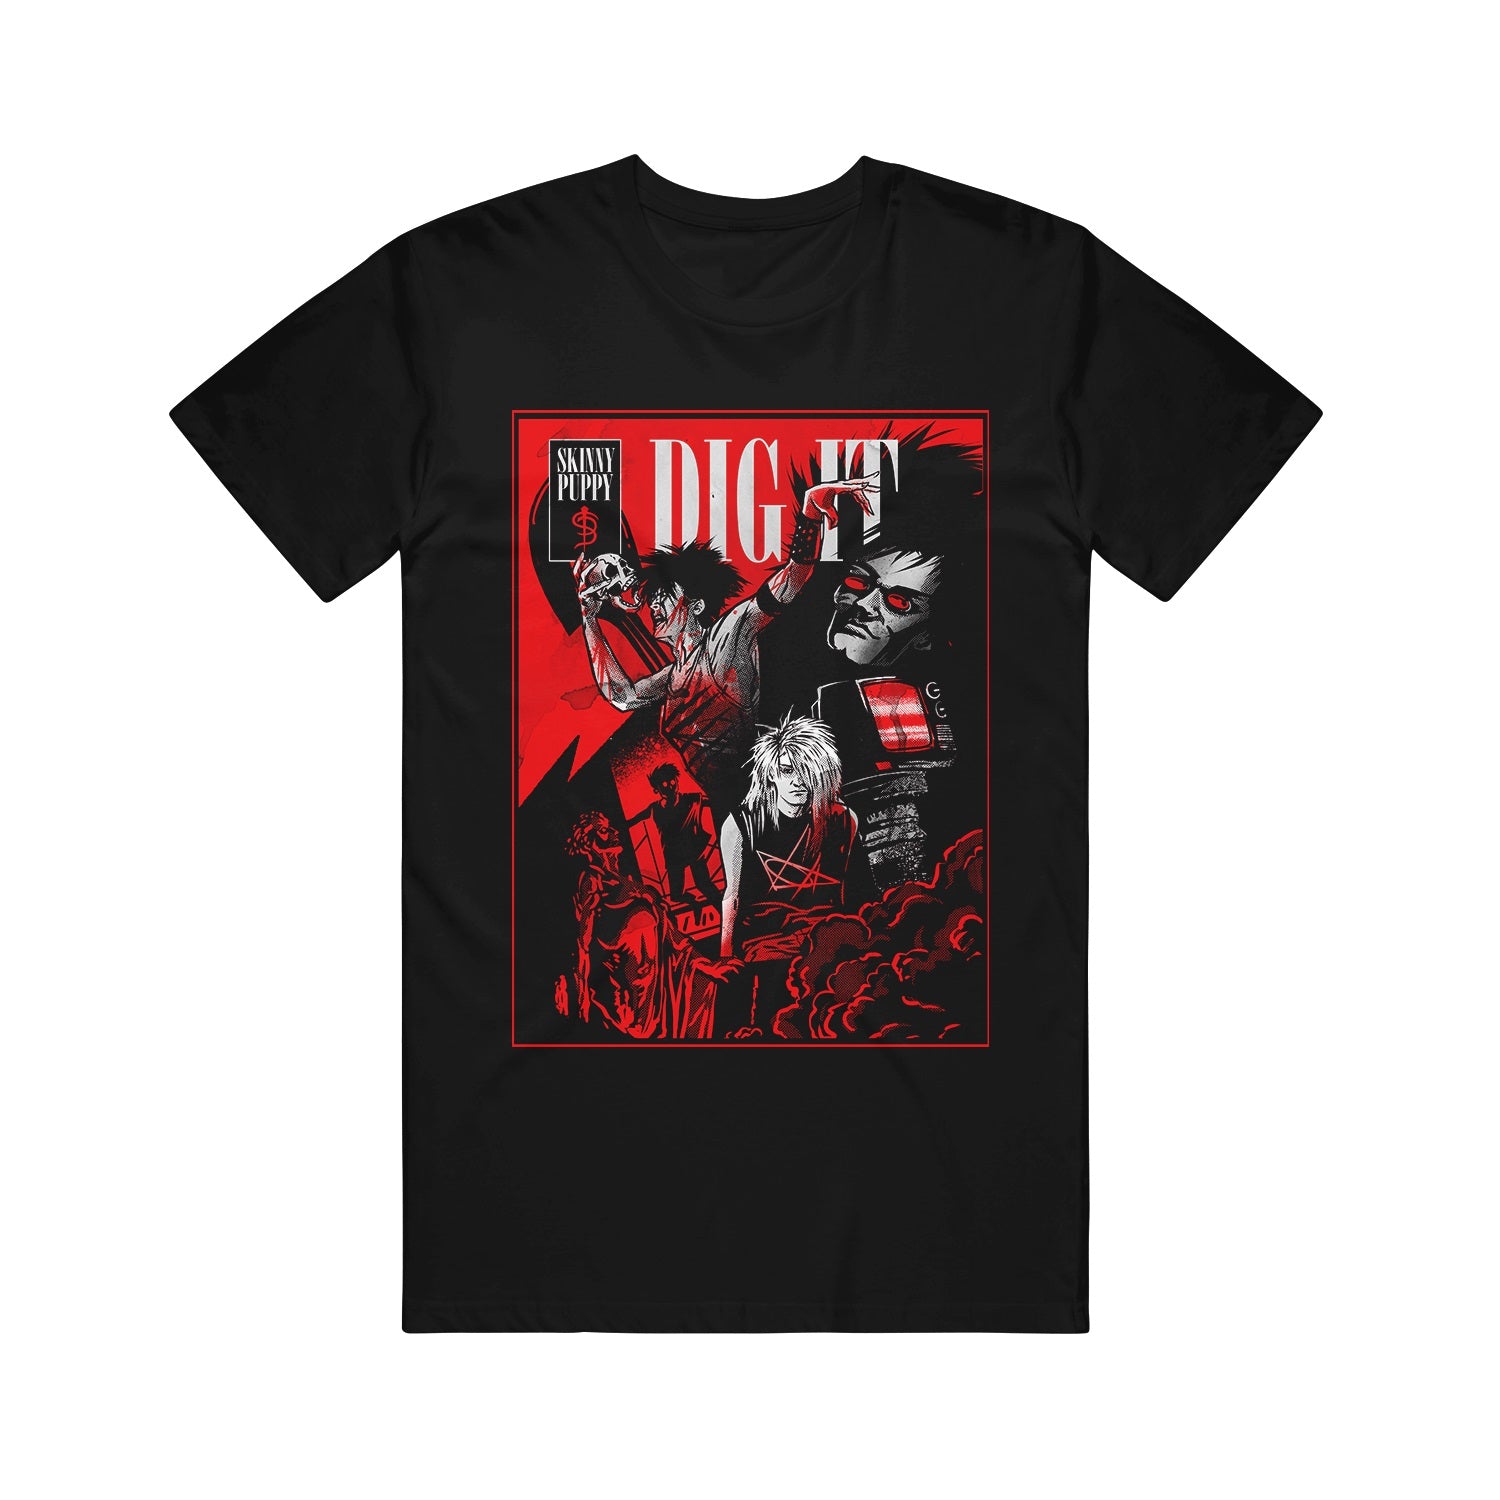  Black tshirt on a white background. Large rectangle in the center of the shirt, inside the rectangle in the upper corner there is a smaller black rectangle that says Skinny Puppy in white lettering and features their SP logo. Next to that says Dig It in white large letters. Below are characters in red, black, white/grey. One person holds a skull, another is their face with red eyes. Below that is a person with teased hair. Someone standing in a doorway. The bottom has a statue of a man and clouds.